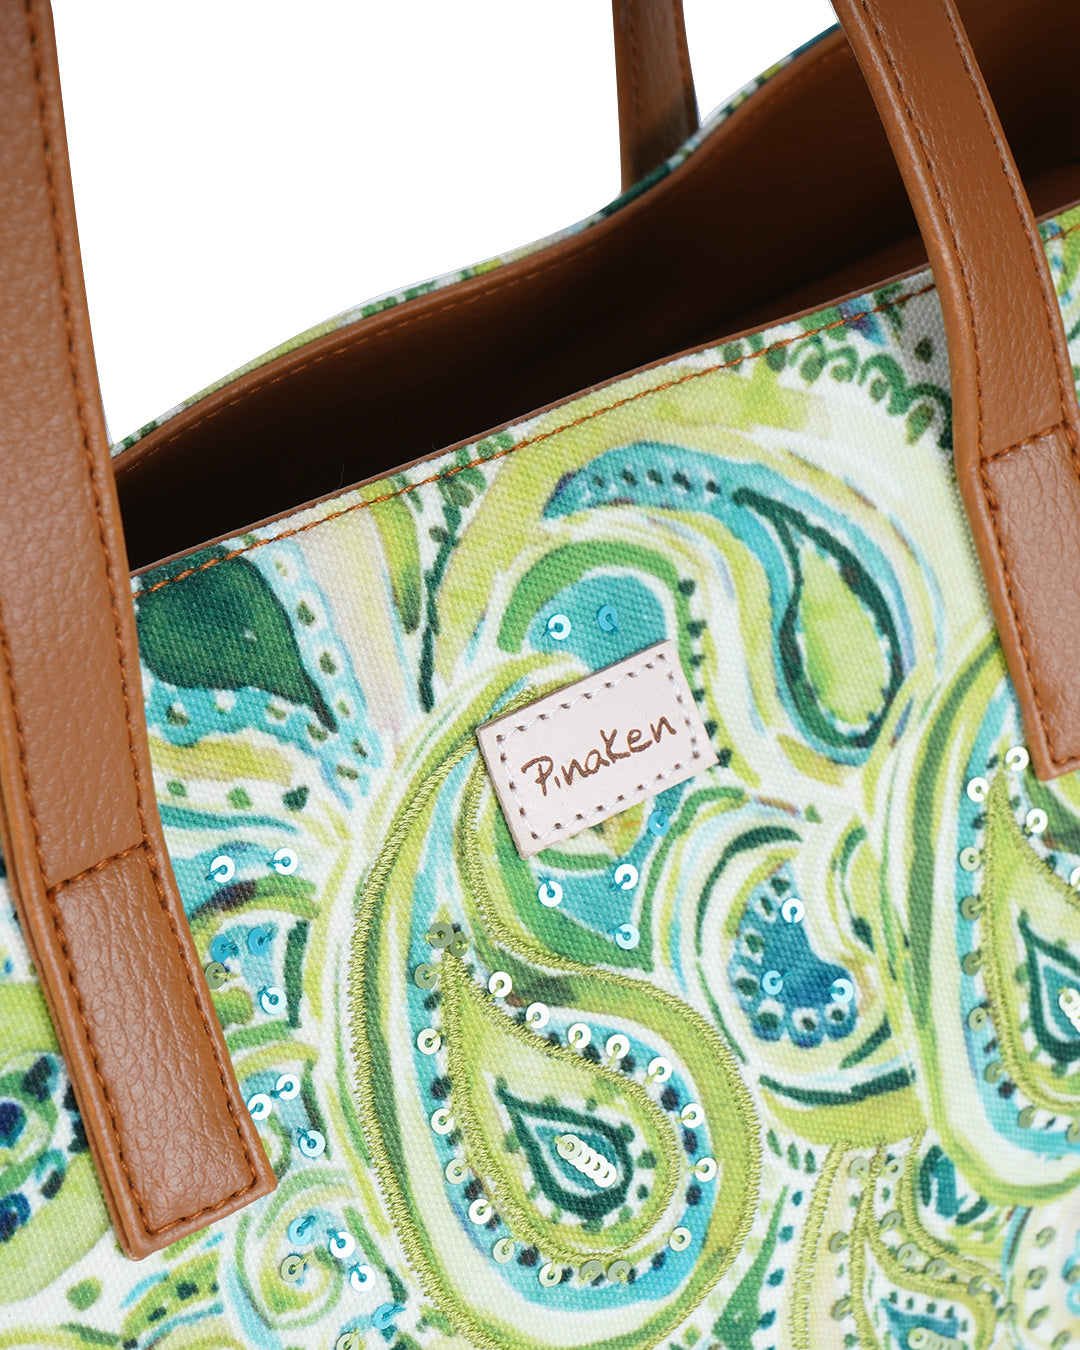 Ombrey Paisely Sunshine Tote Bag